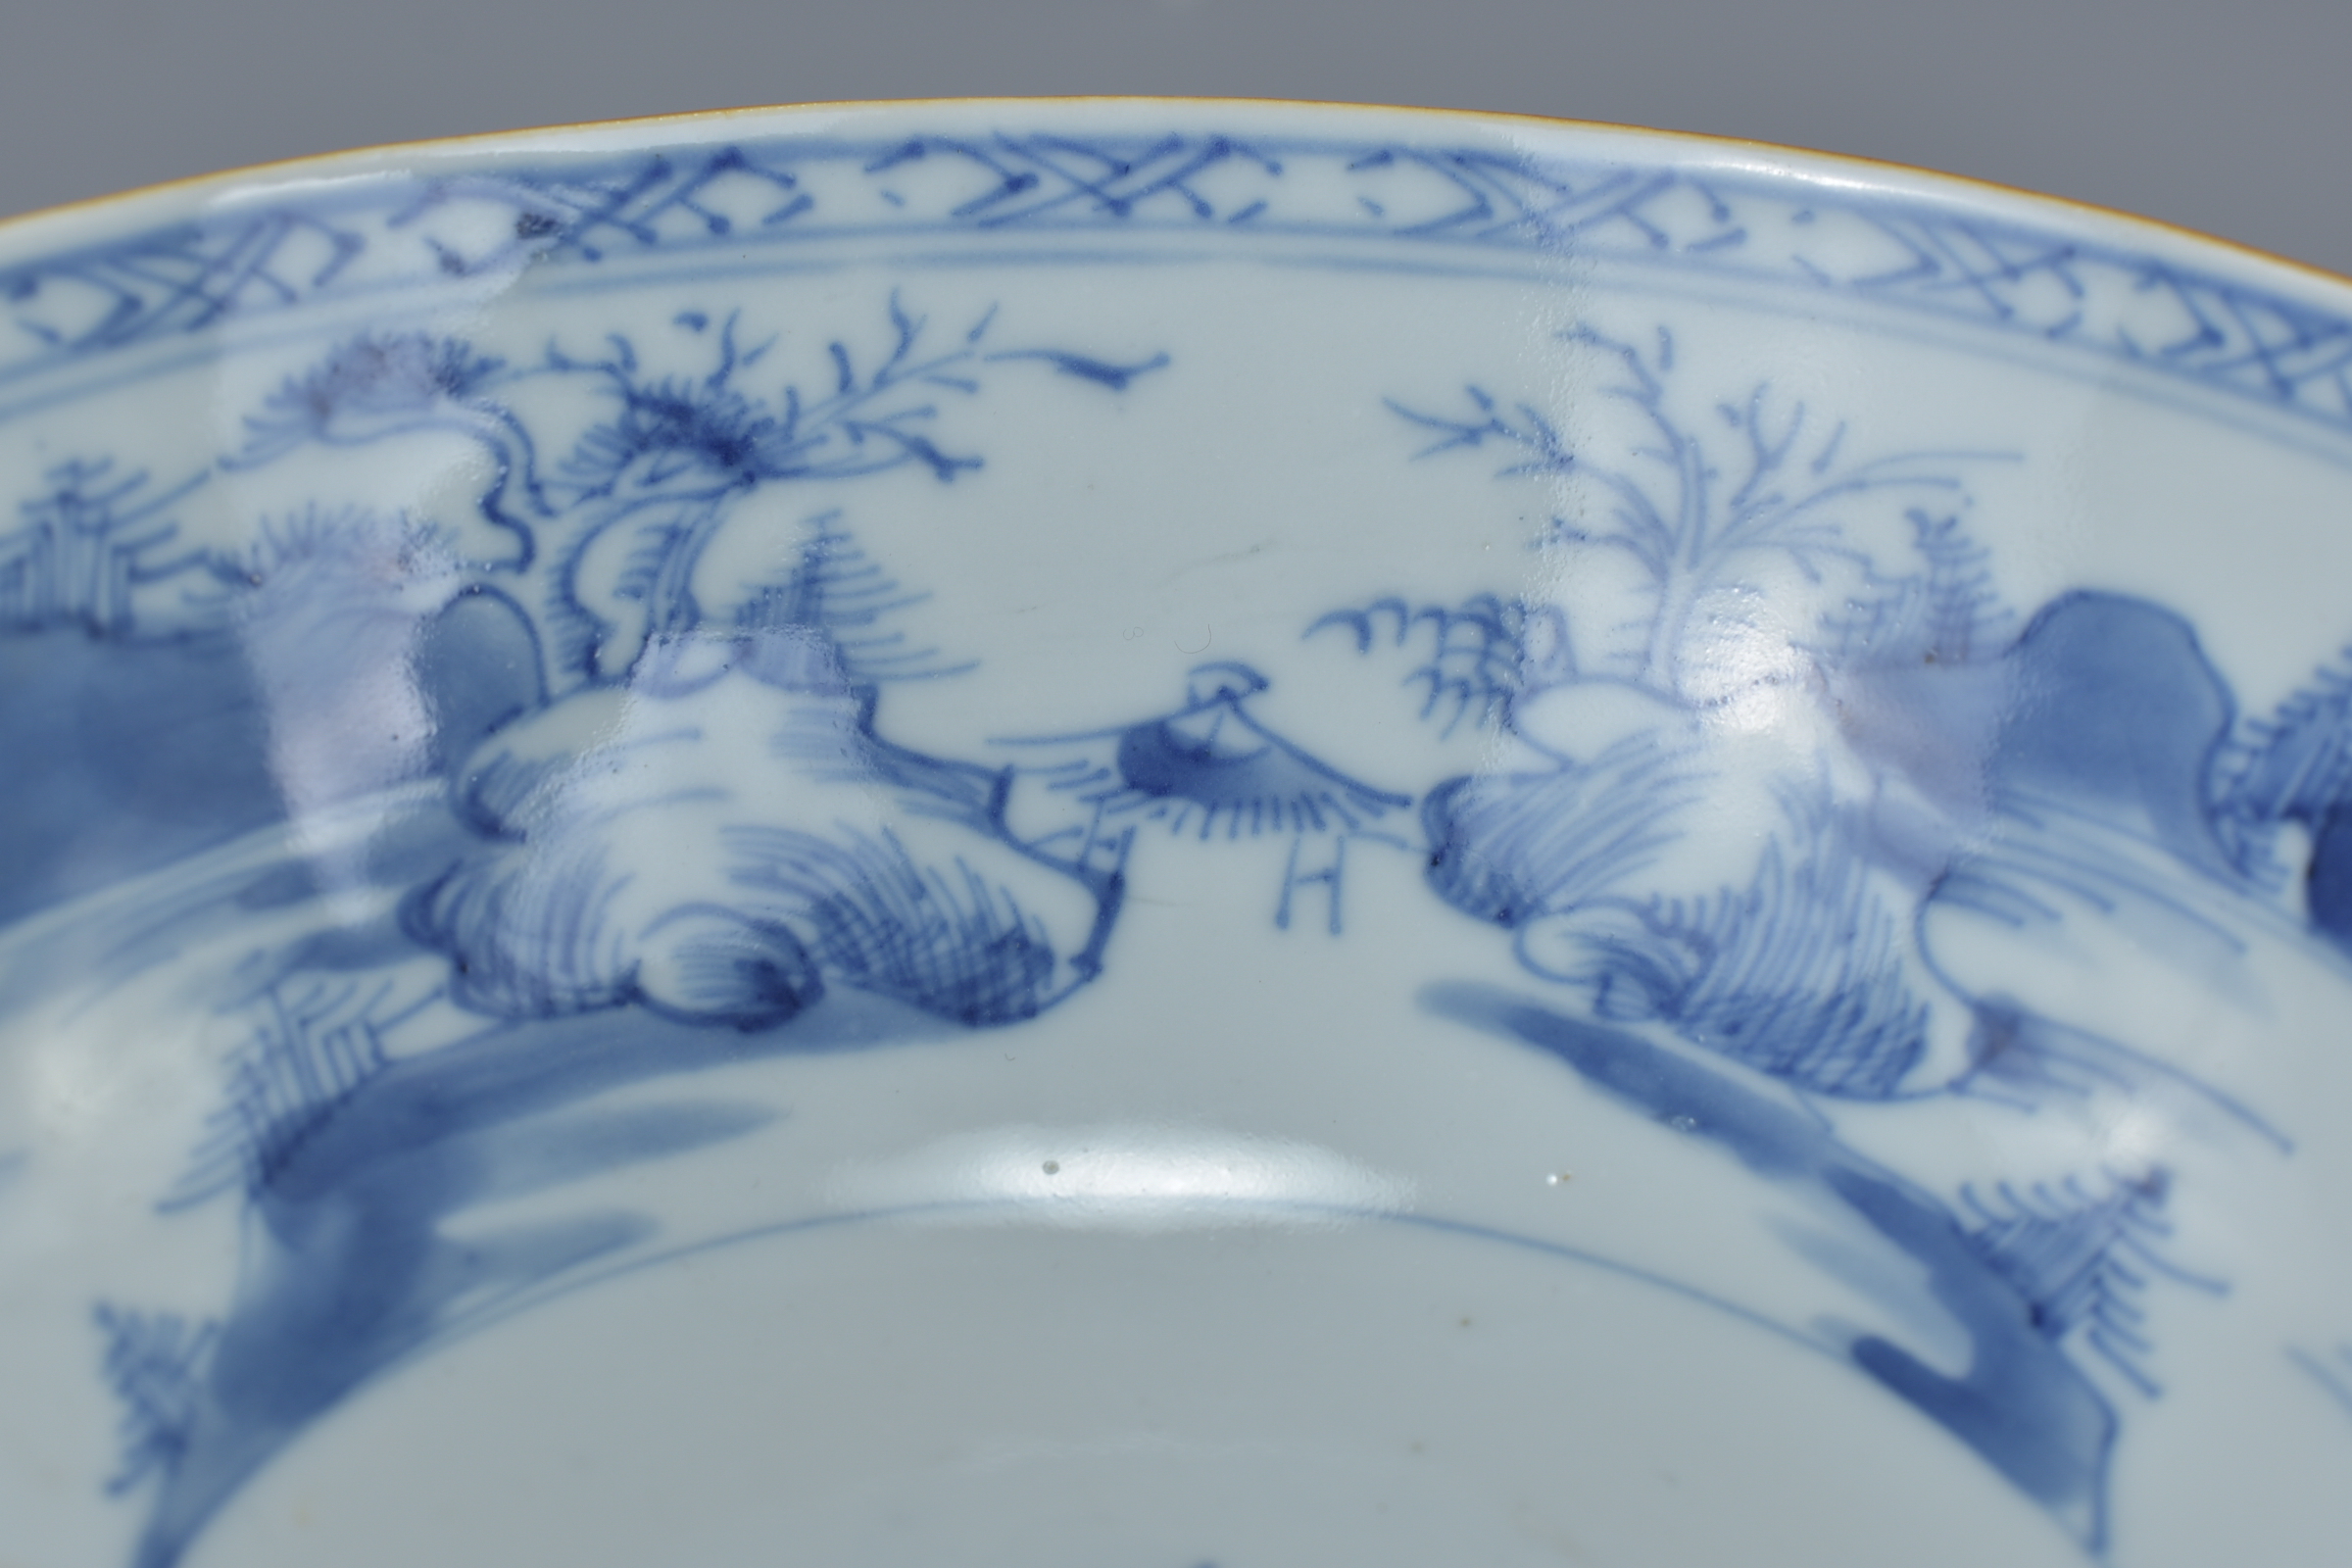 A Chinese 18th century tea-dust brown glazed export porcelain bowl with underglaze blue interior dep - Image 6 of 6